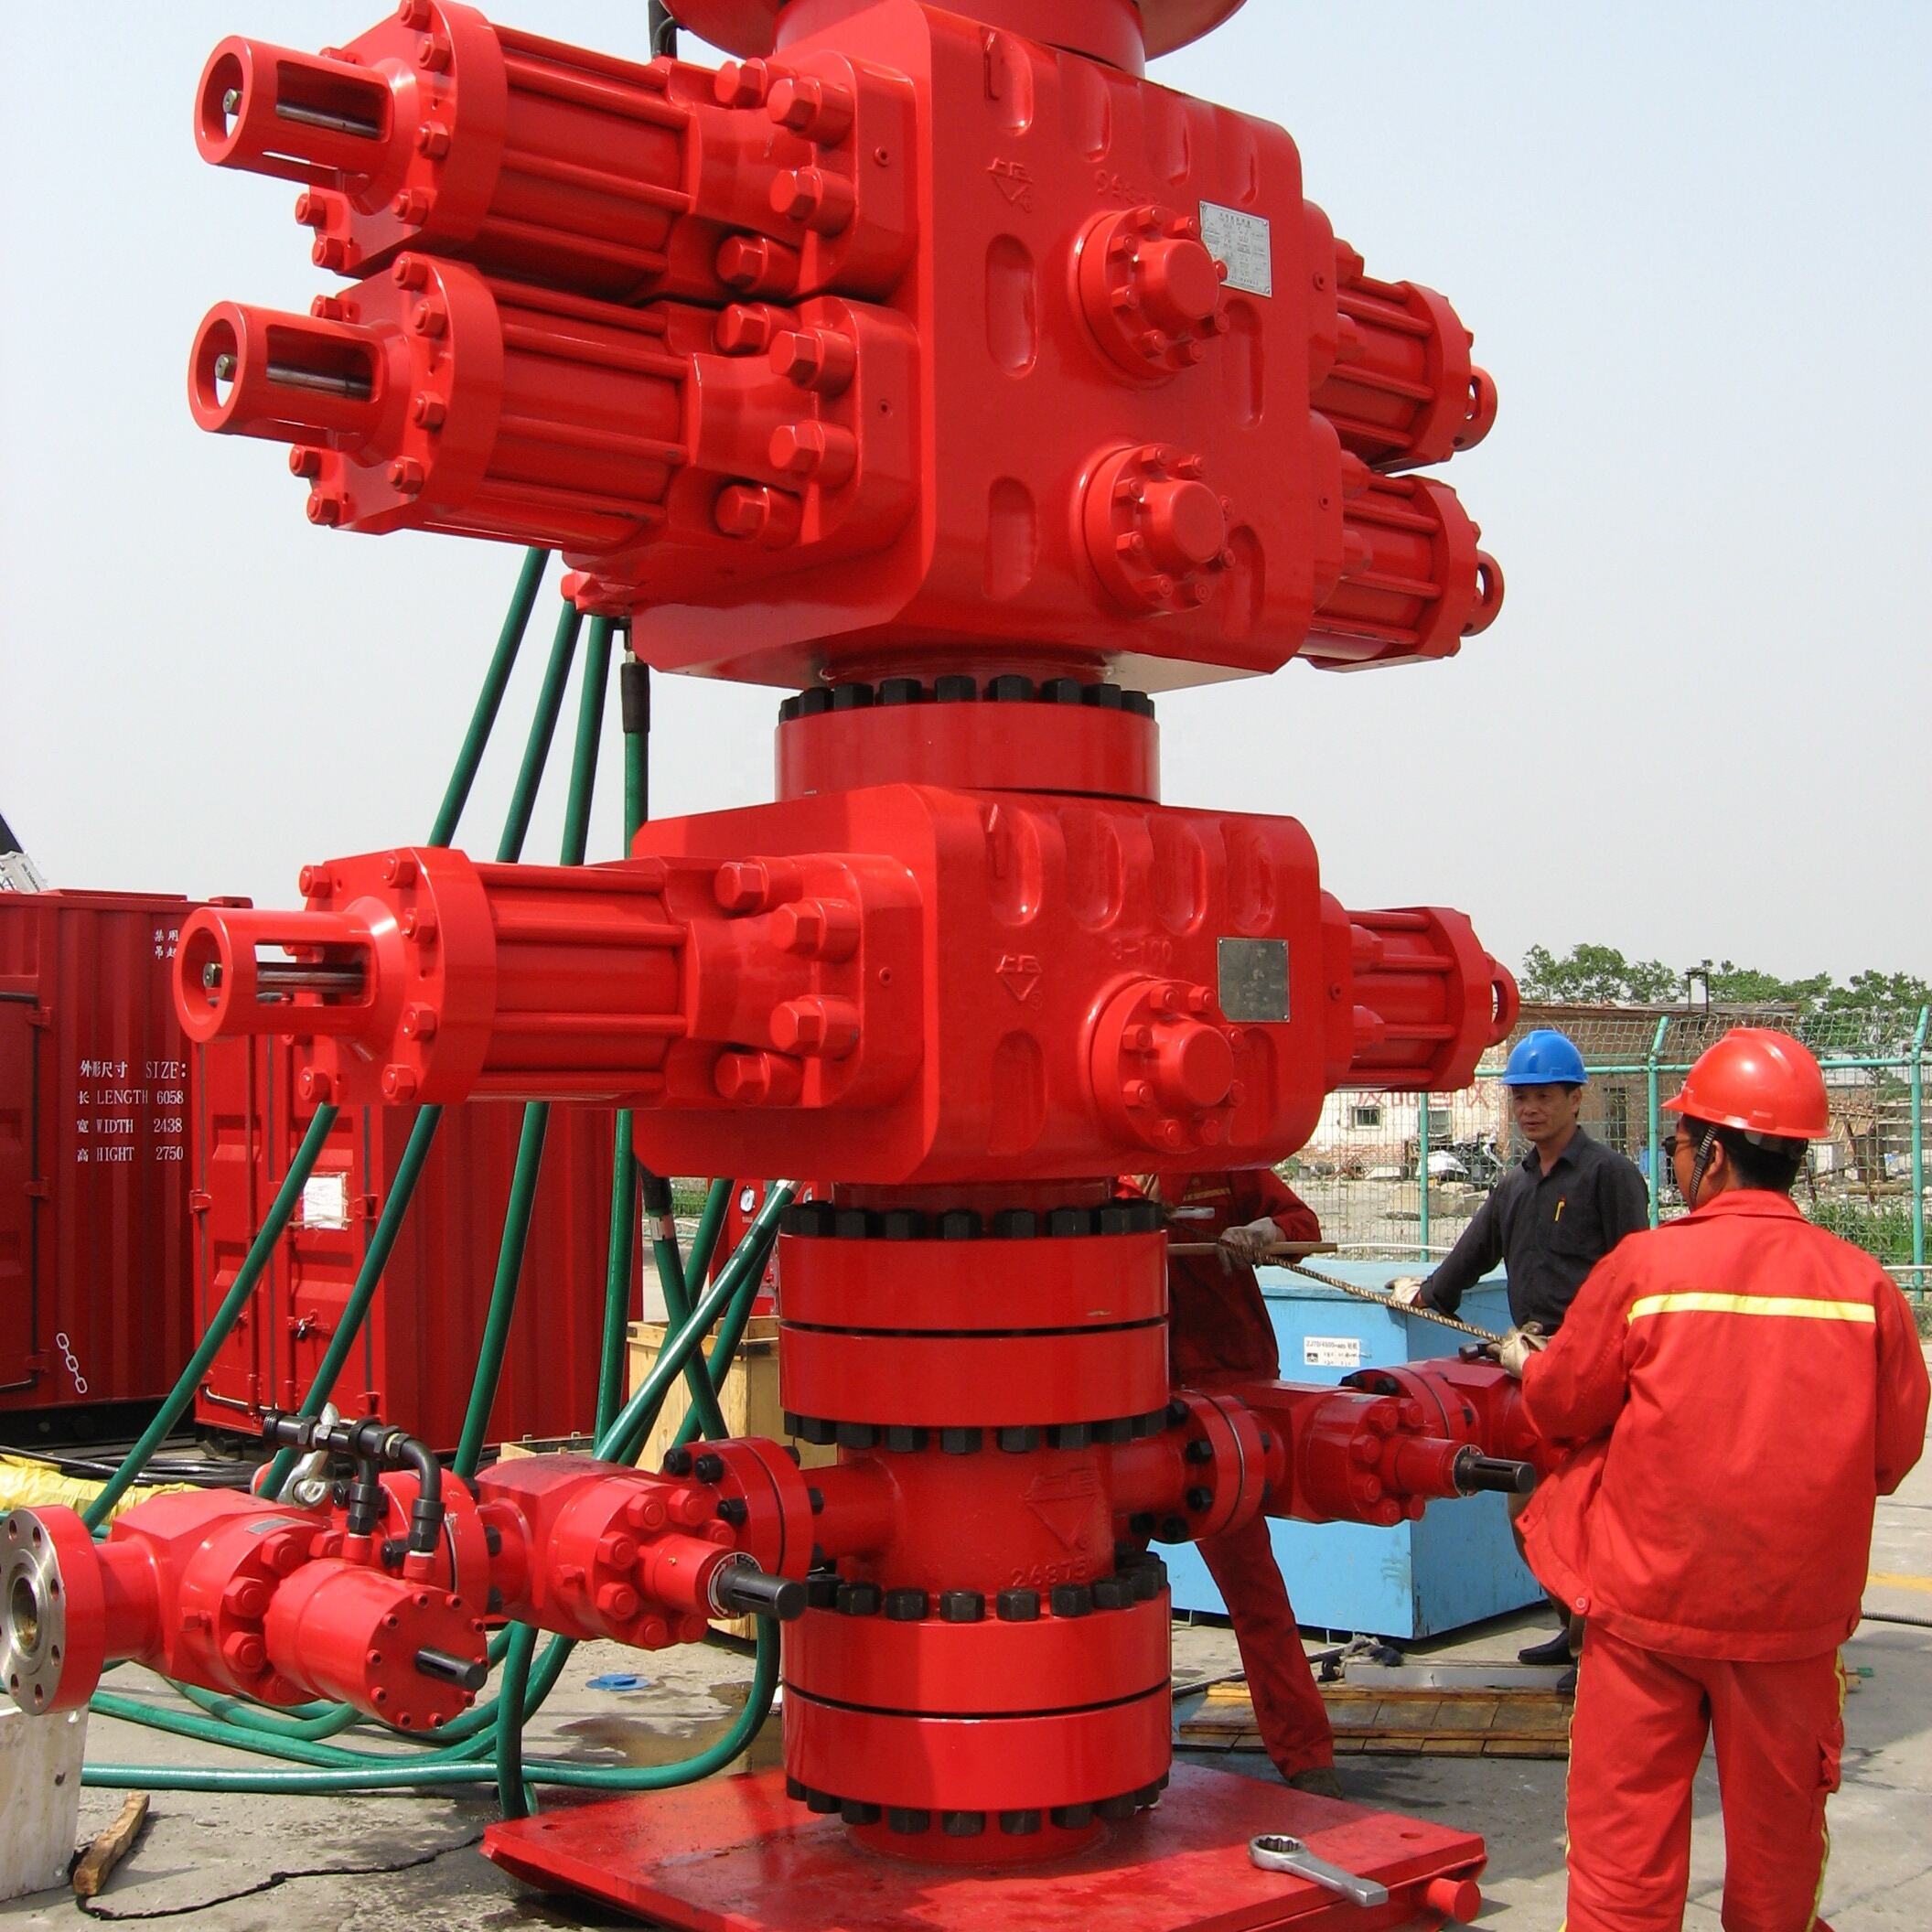 Well control wireline /coiled tubing /oilfield wellhead tools/Blowout Preventer Shaffer Type Double Ram Bop manufacture